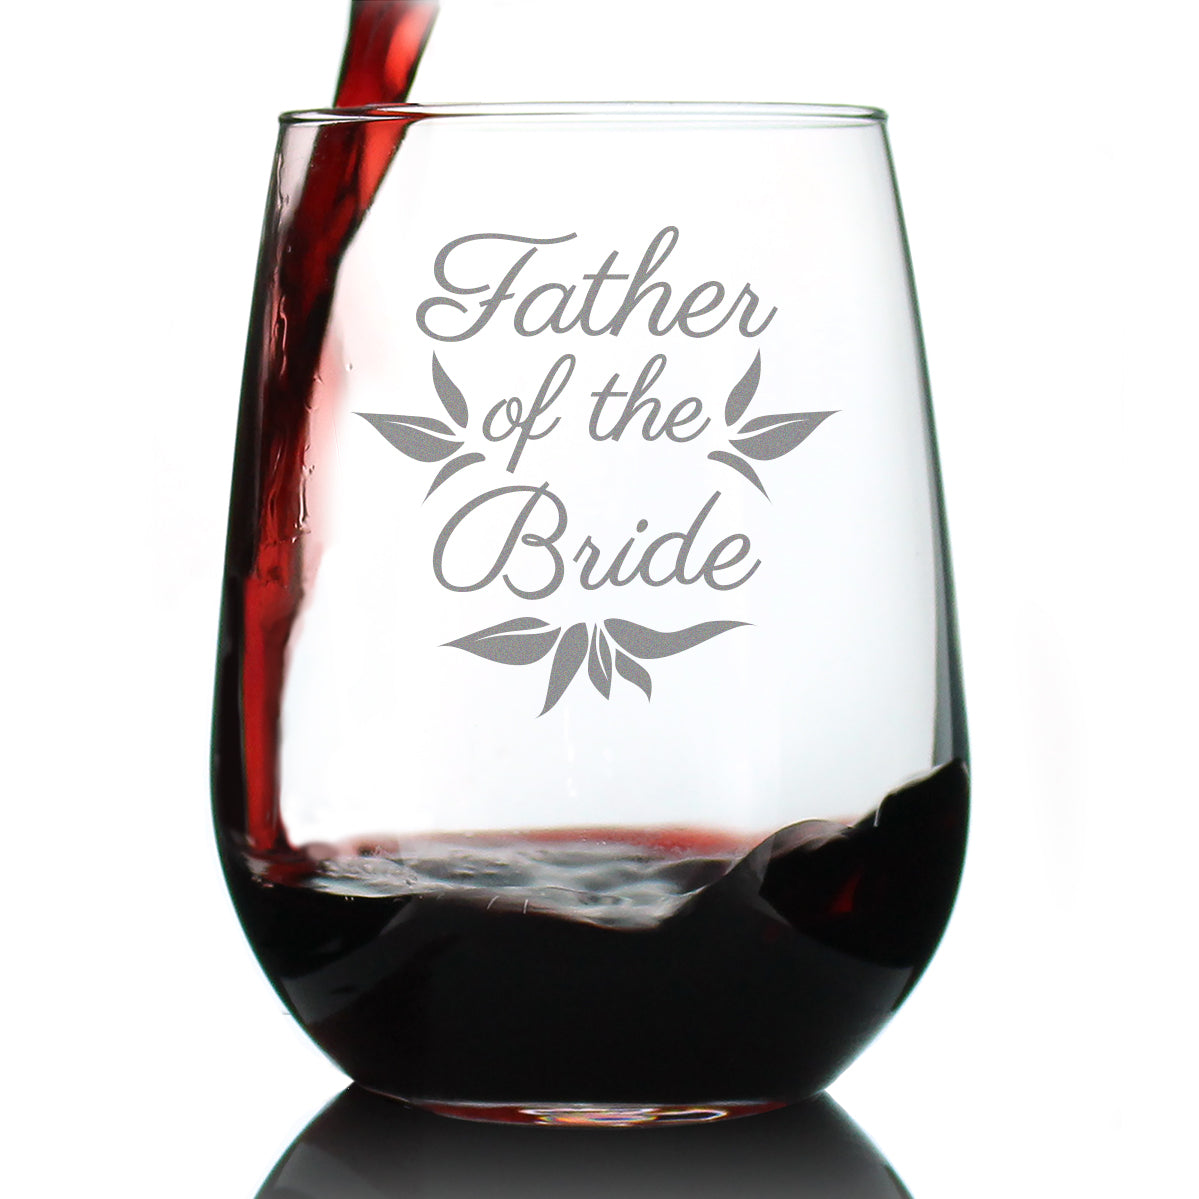 Father of the Bride Stemless Wine Glass - Unique Wedding Gift for Soon to be Father-in-Law - Cute Engraved Wedding Cup Gift